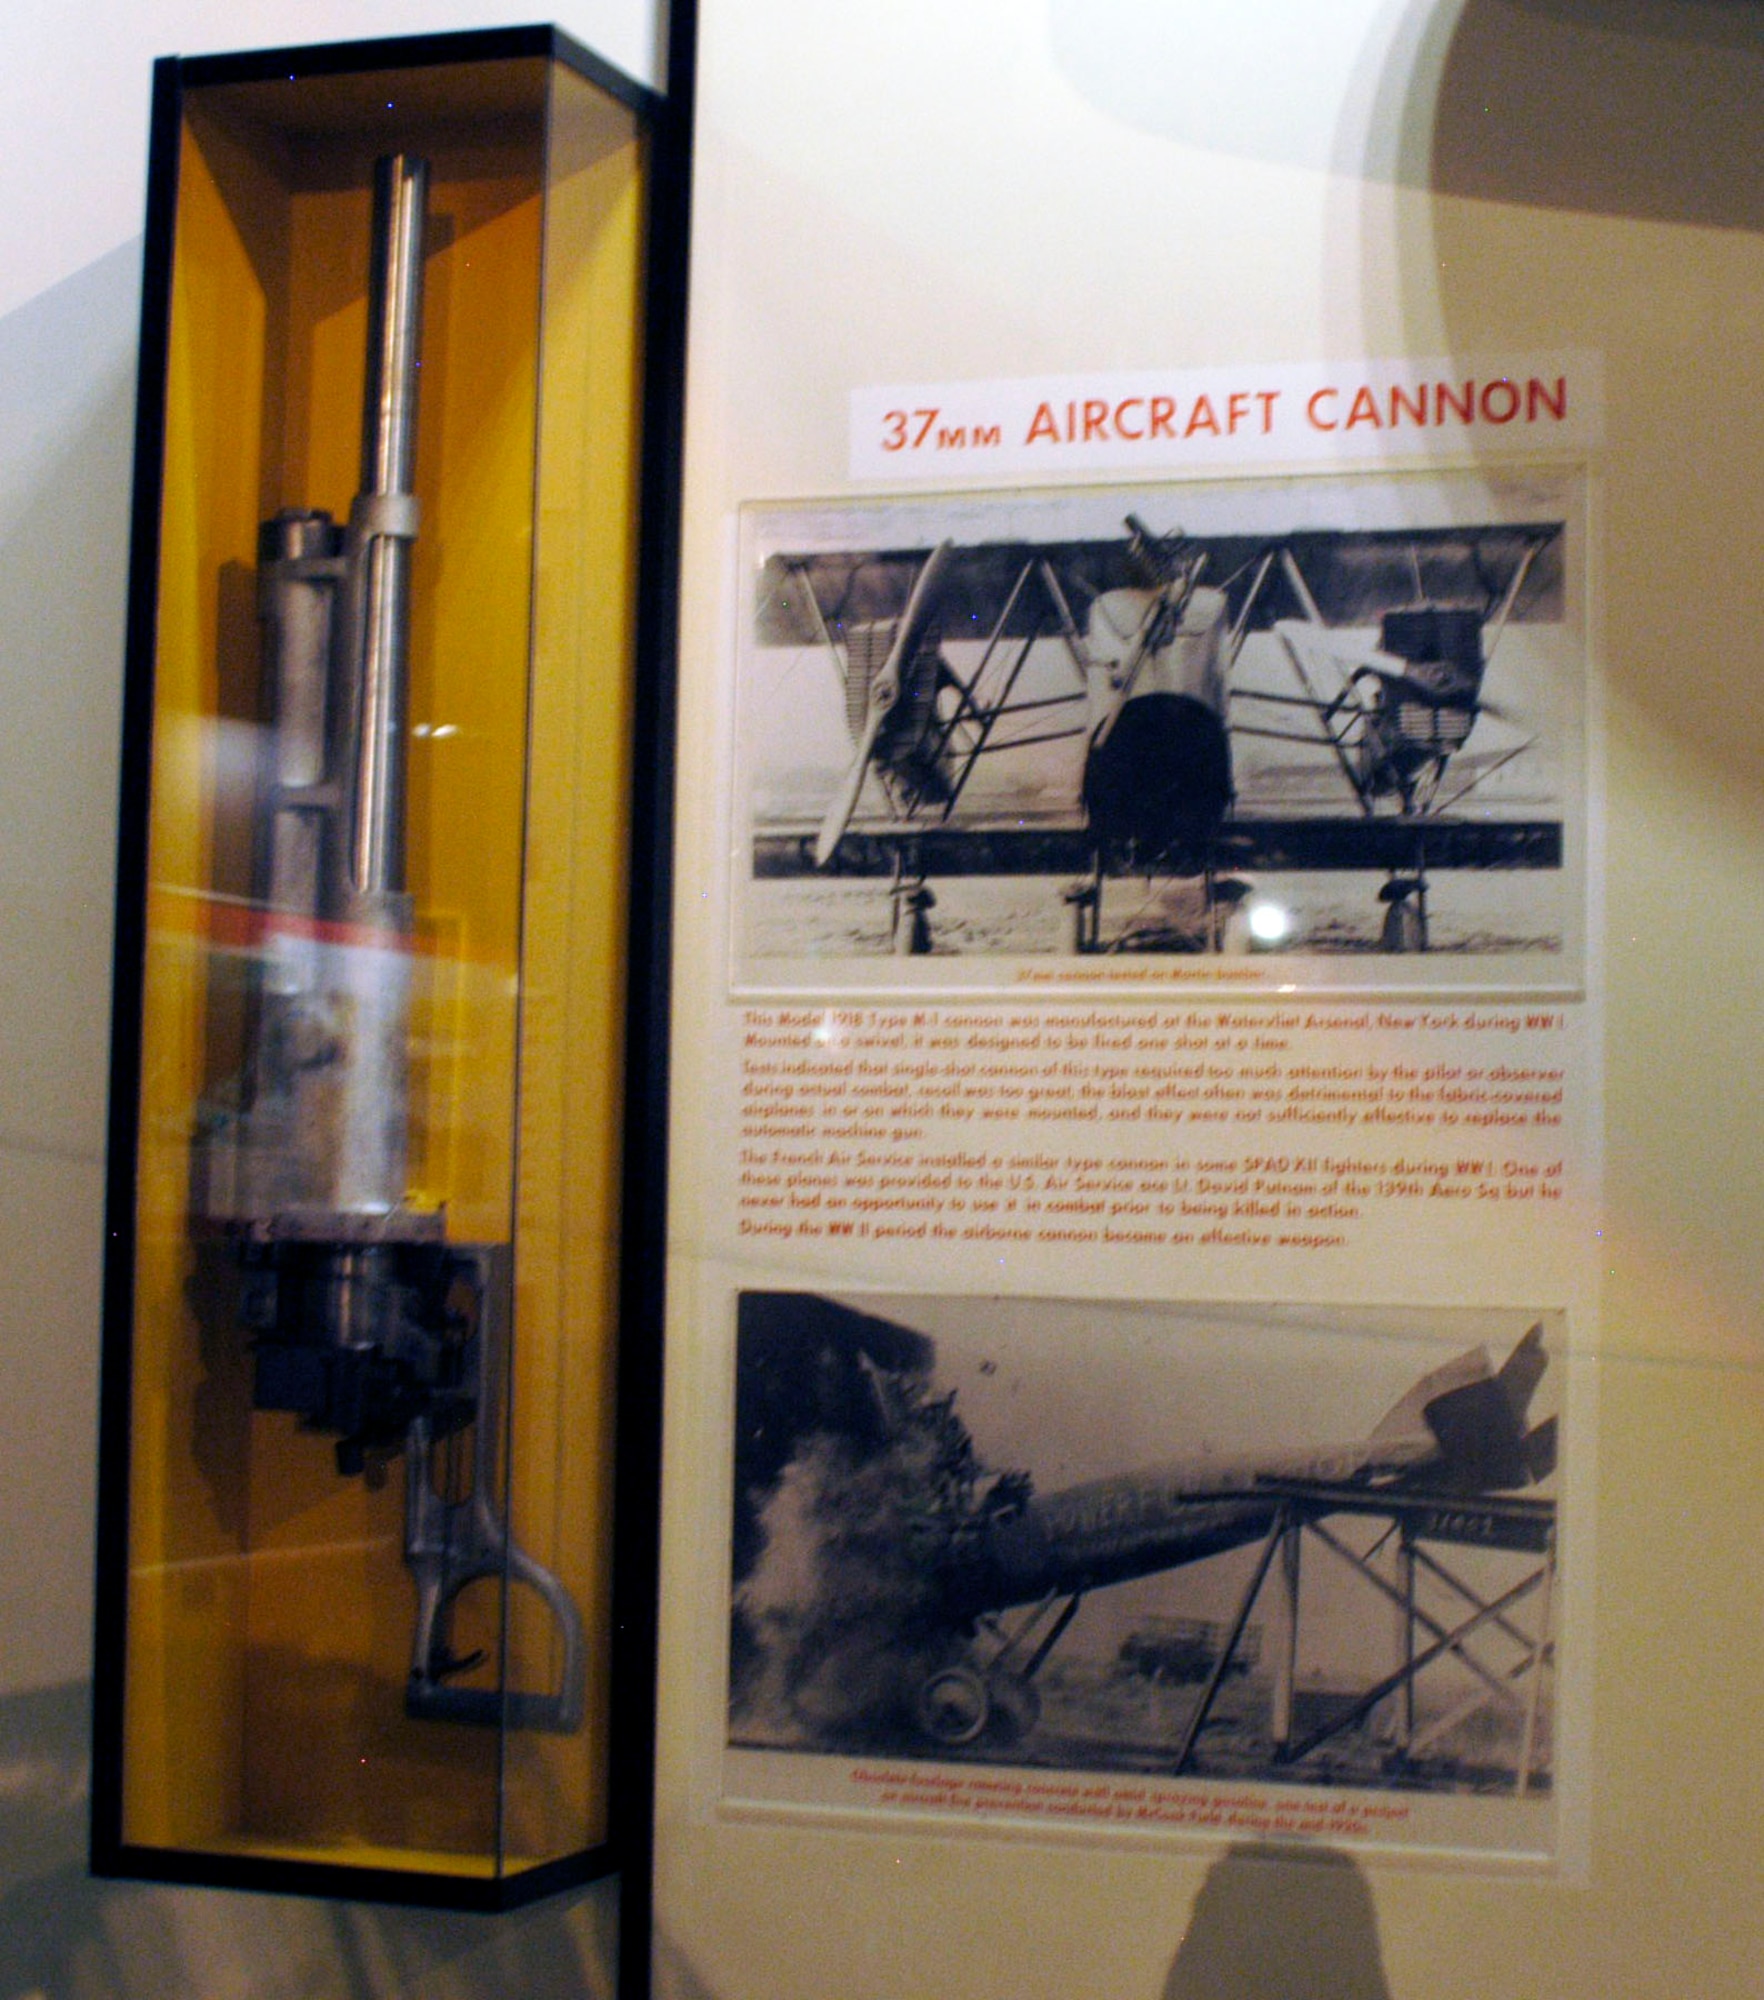 DAYTON, Ohio -- 37mm Aircraft Cannon in the Early Years Gallery at the National Museum of the United States Air Force. (U.S. Air Force photo)